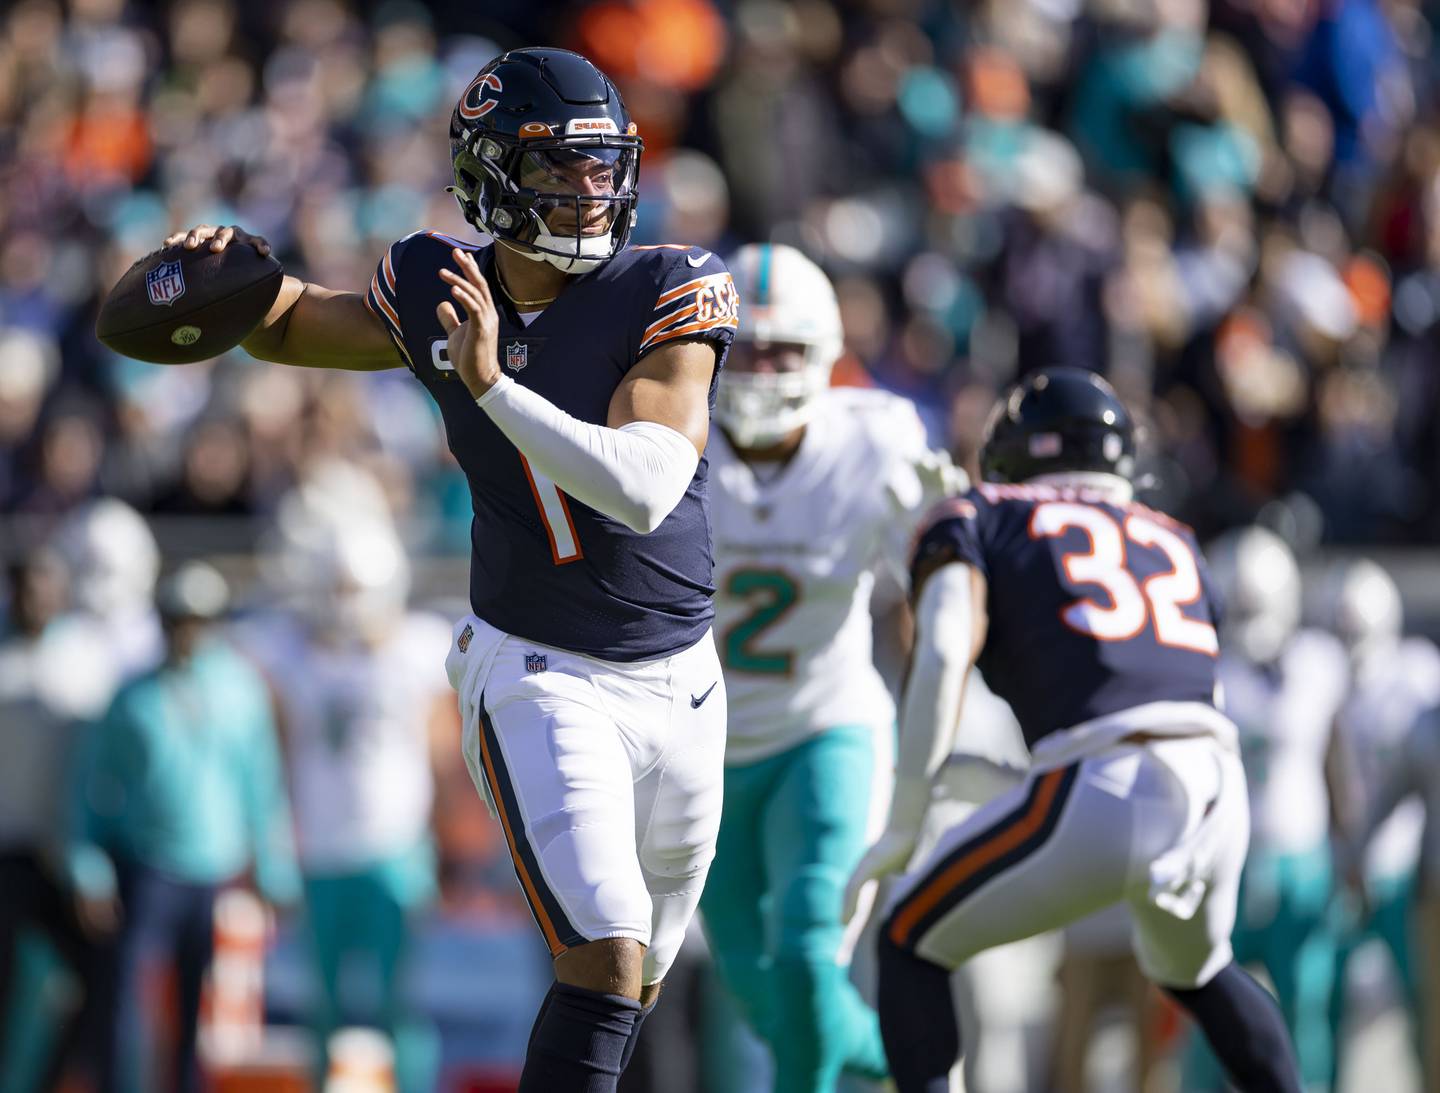 Bears quarterback Justin Fields passes against the Dolphins at Soldier Field on Nov. 6, 2022.